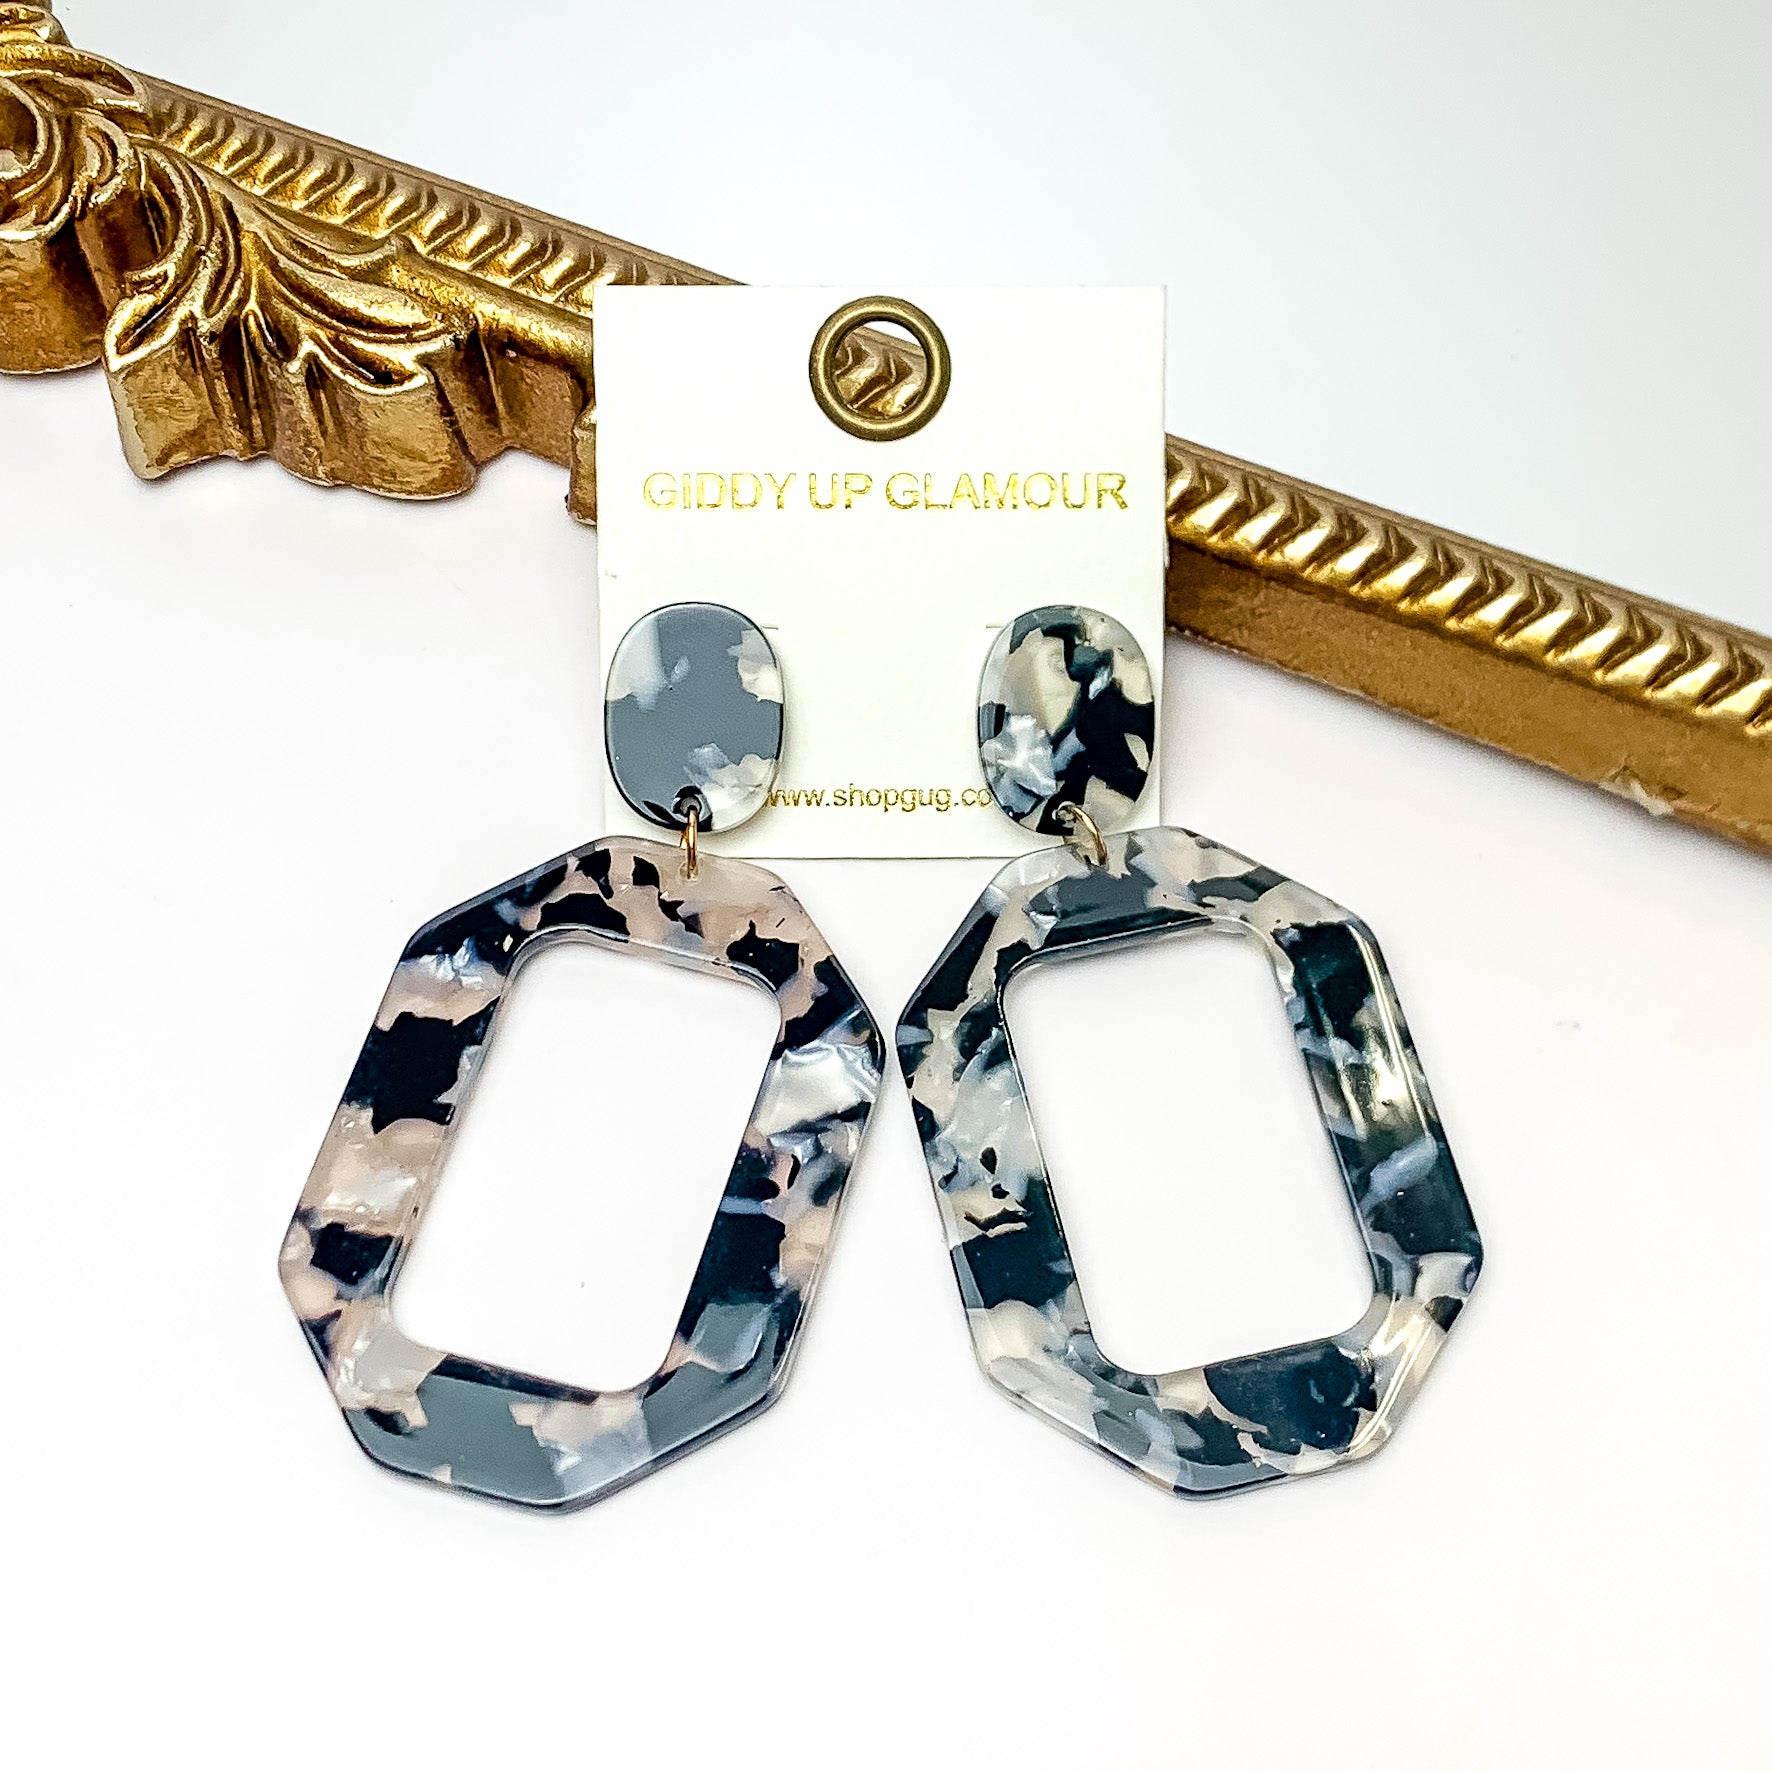 Malibu Marble Open Rectangle Earrings in black. Pictured on a white background with the earrings laying on a gold frame.